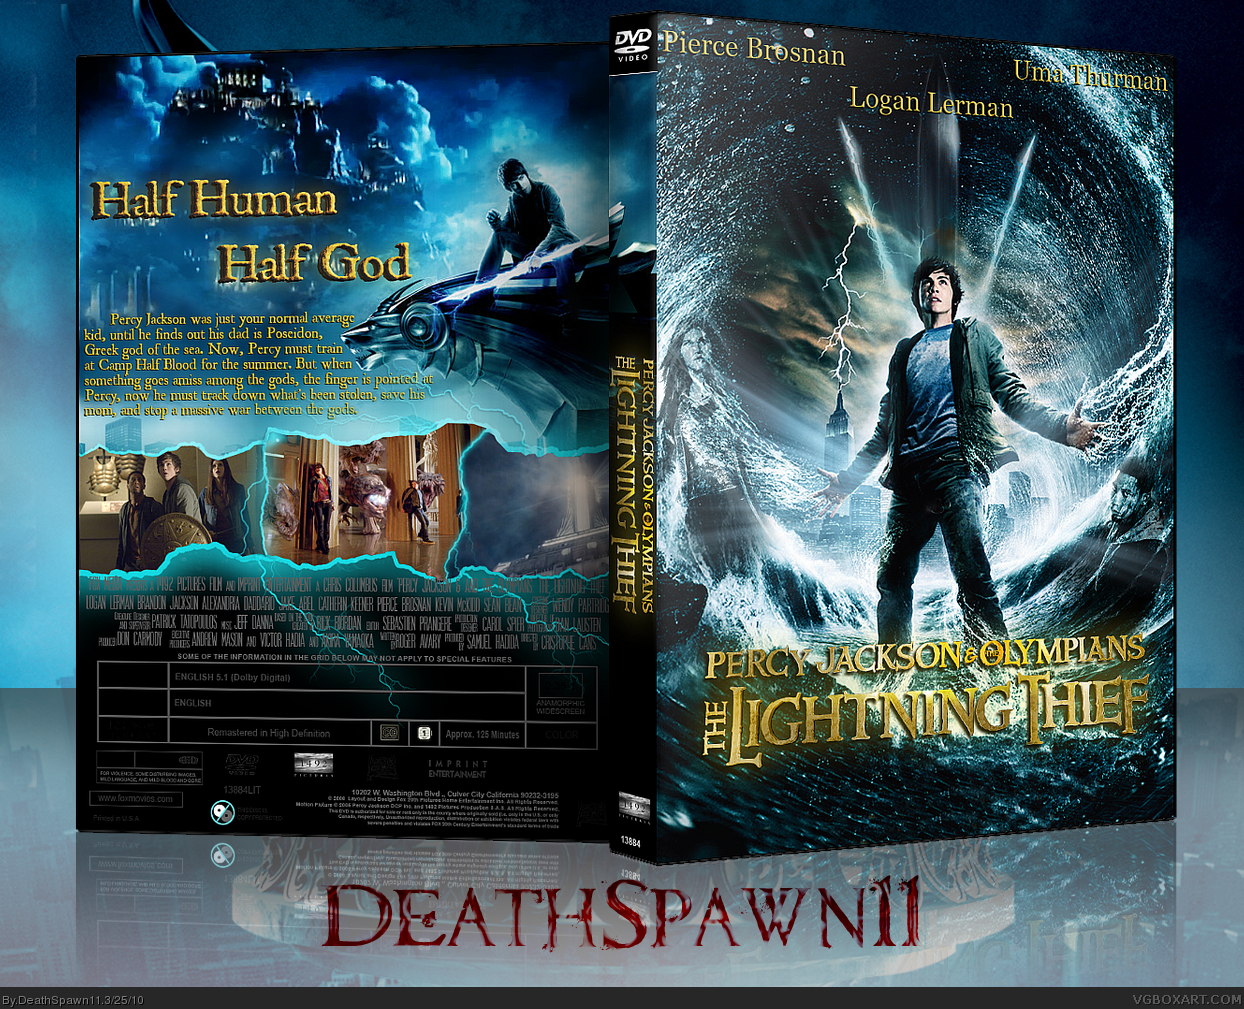 Percy Jackson & The Olympians: The Lightning Thief box cover